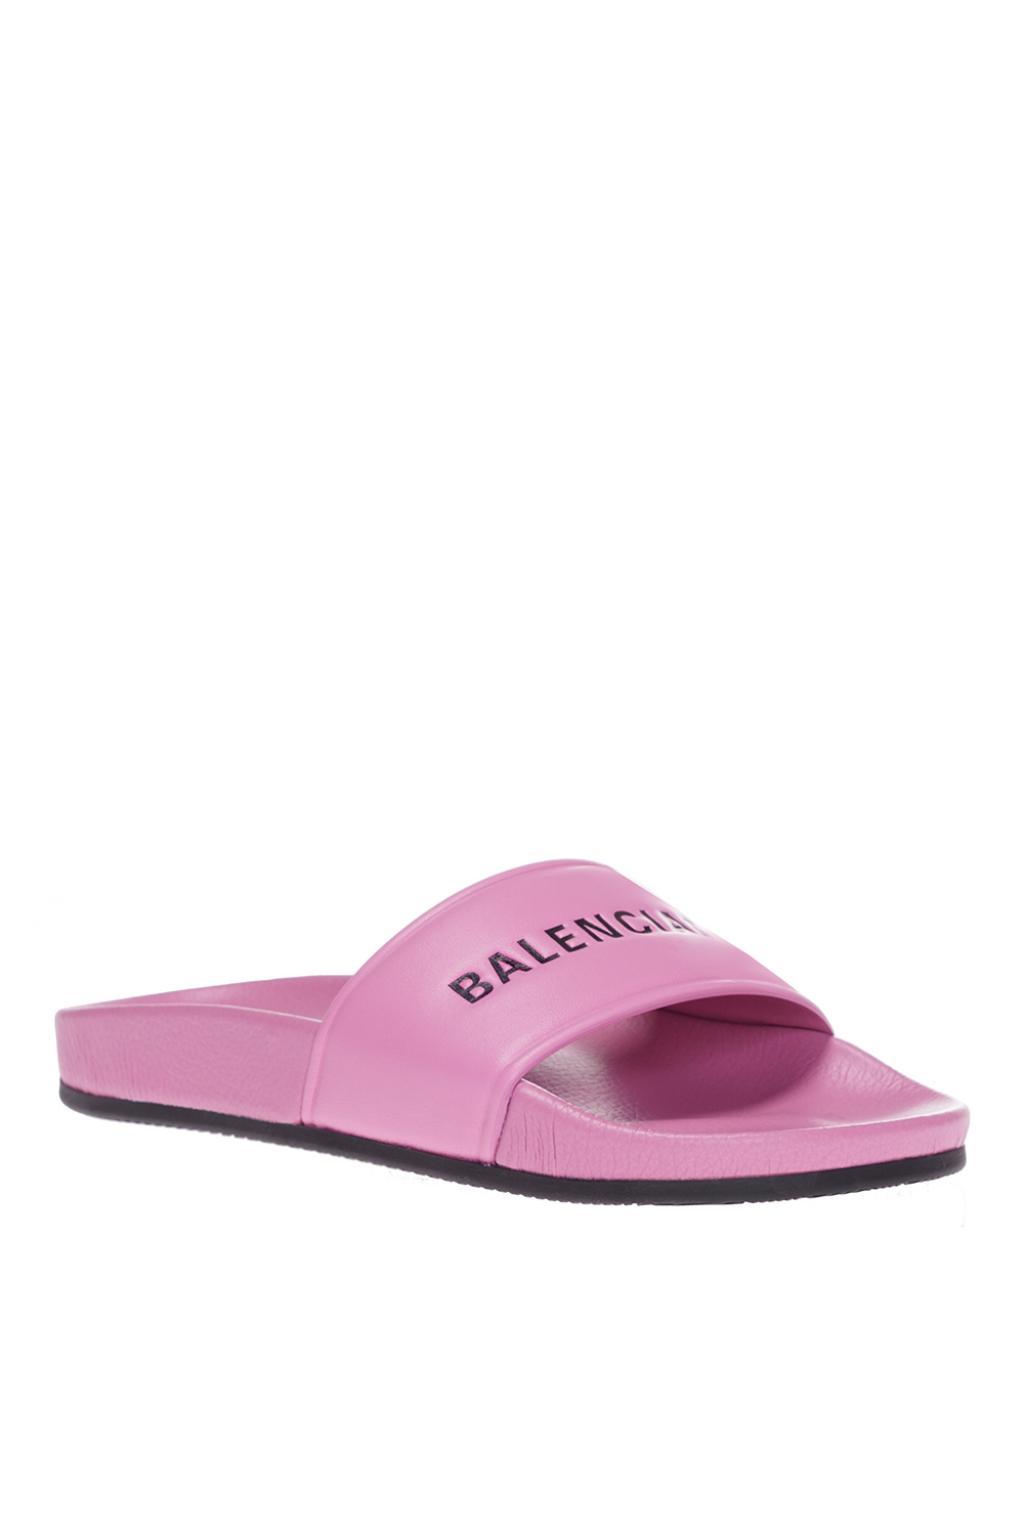 Brand New Balenciaga Slides Pink Leather SALE LIMITED TIME Womens  Fashion Footwear Slippers and slides on Carousell